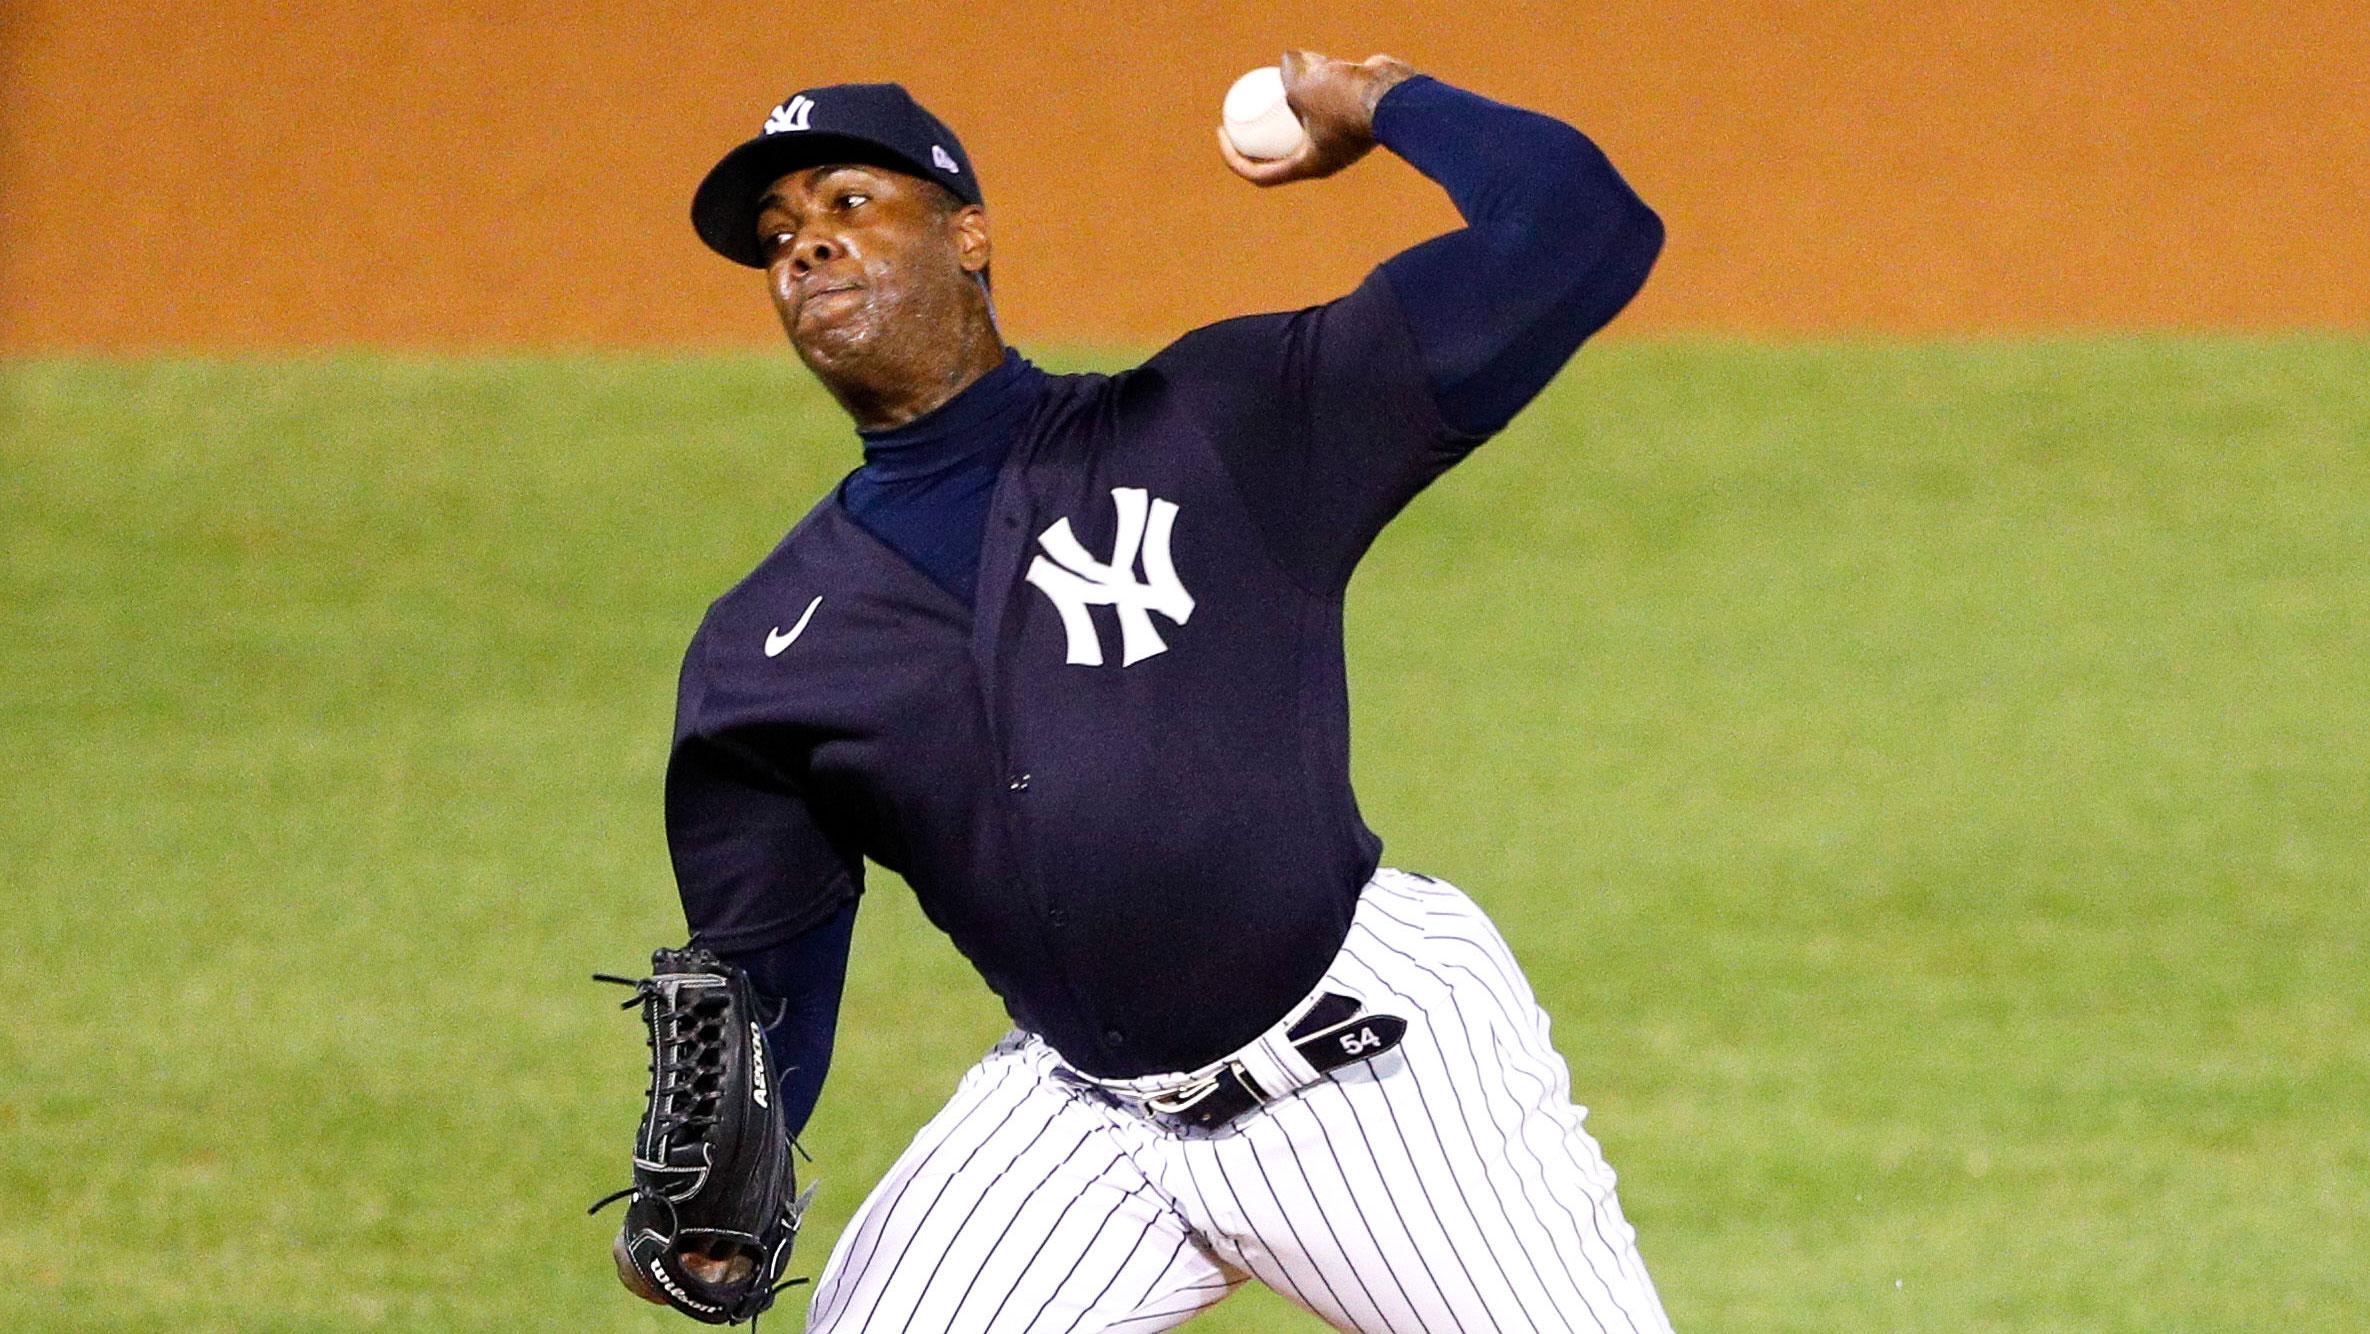 Mar 26, 2021; Tampa, Florida, USA; New York Yankees relief pitcher Aroldis Chapman (54) pitches in the sixth inning against the Baltimore Orioles during spring training at George M. Steinbrenner Field. / Nathan Ray Seebeck-USA TODAY Sports